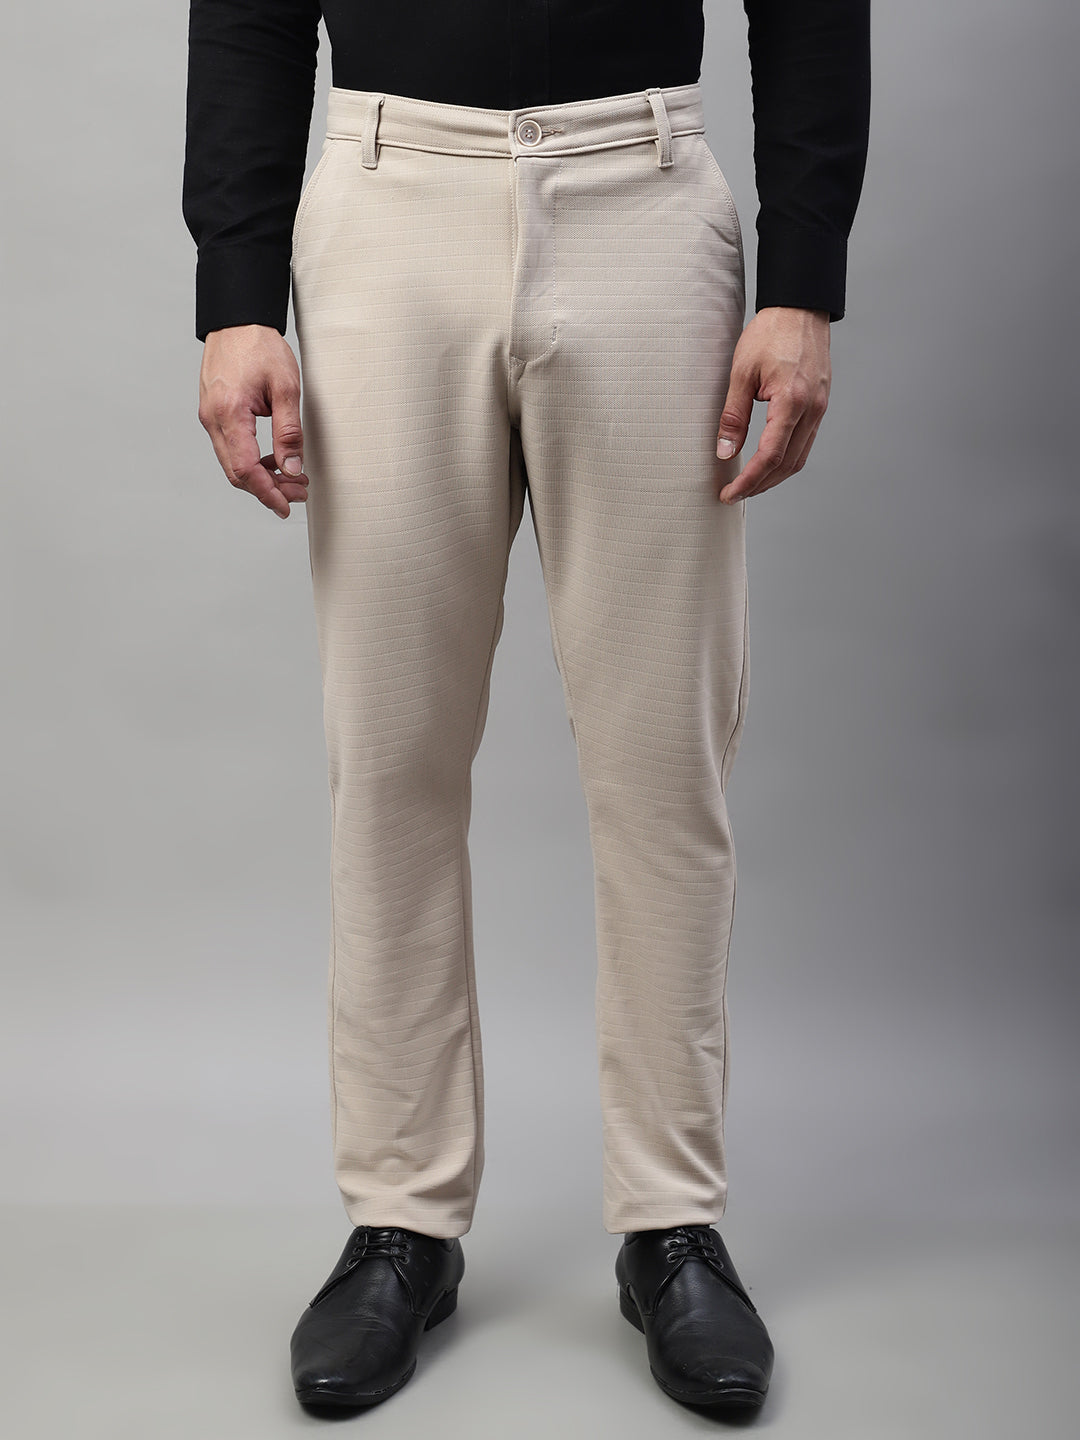 Washable Comfortable Plain Cream Cotton Formal Mens Pant For Party Wear  Waist Size 32 at Best Price in Delhi | Lot Hilot